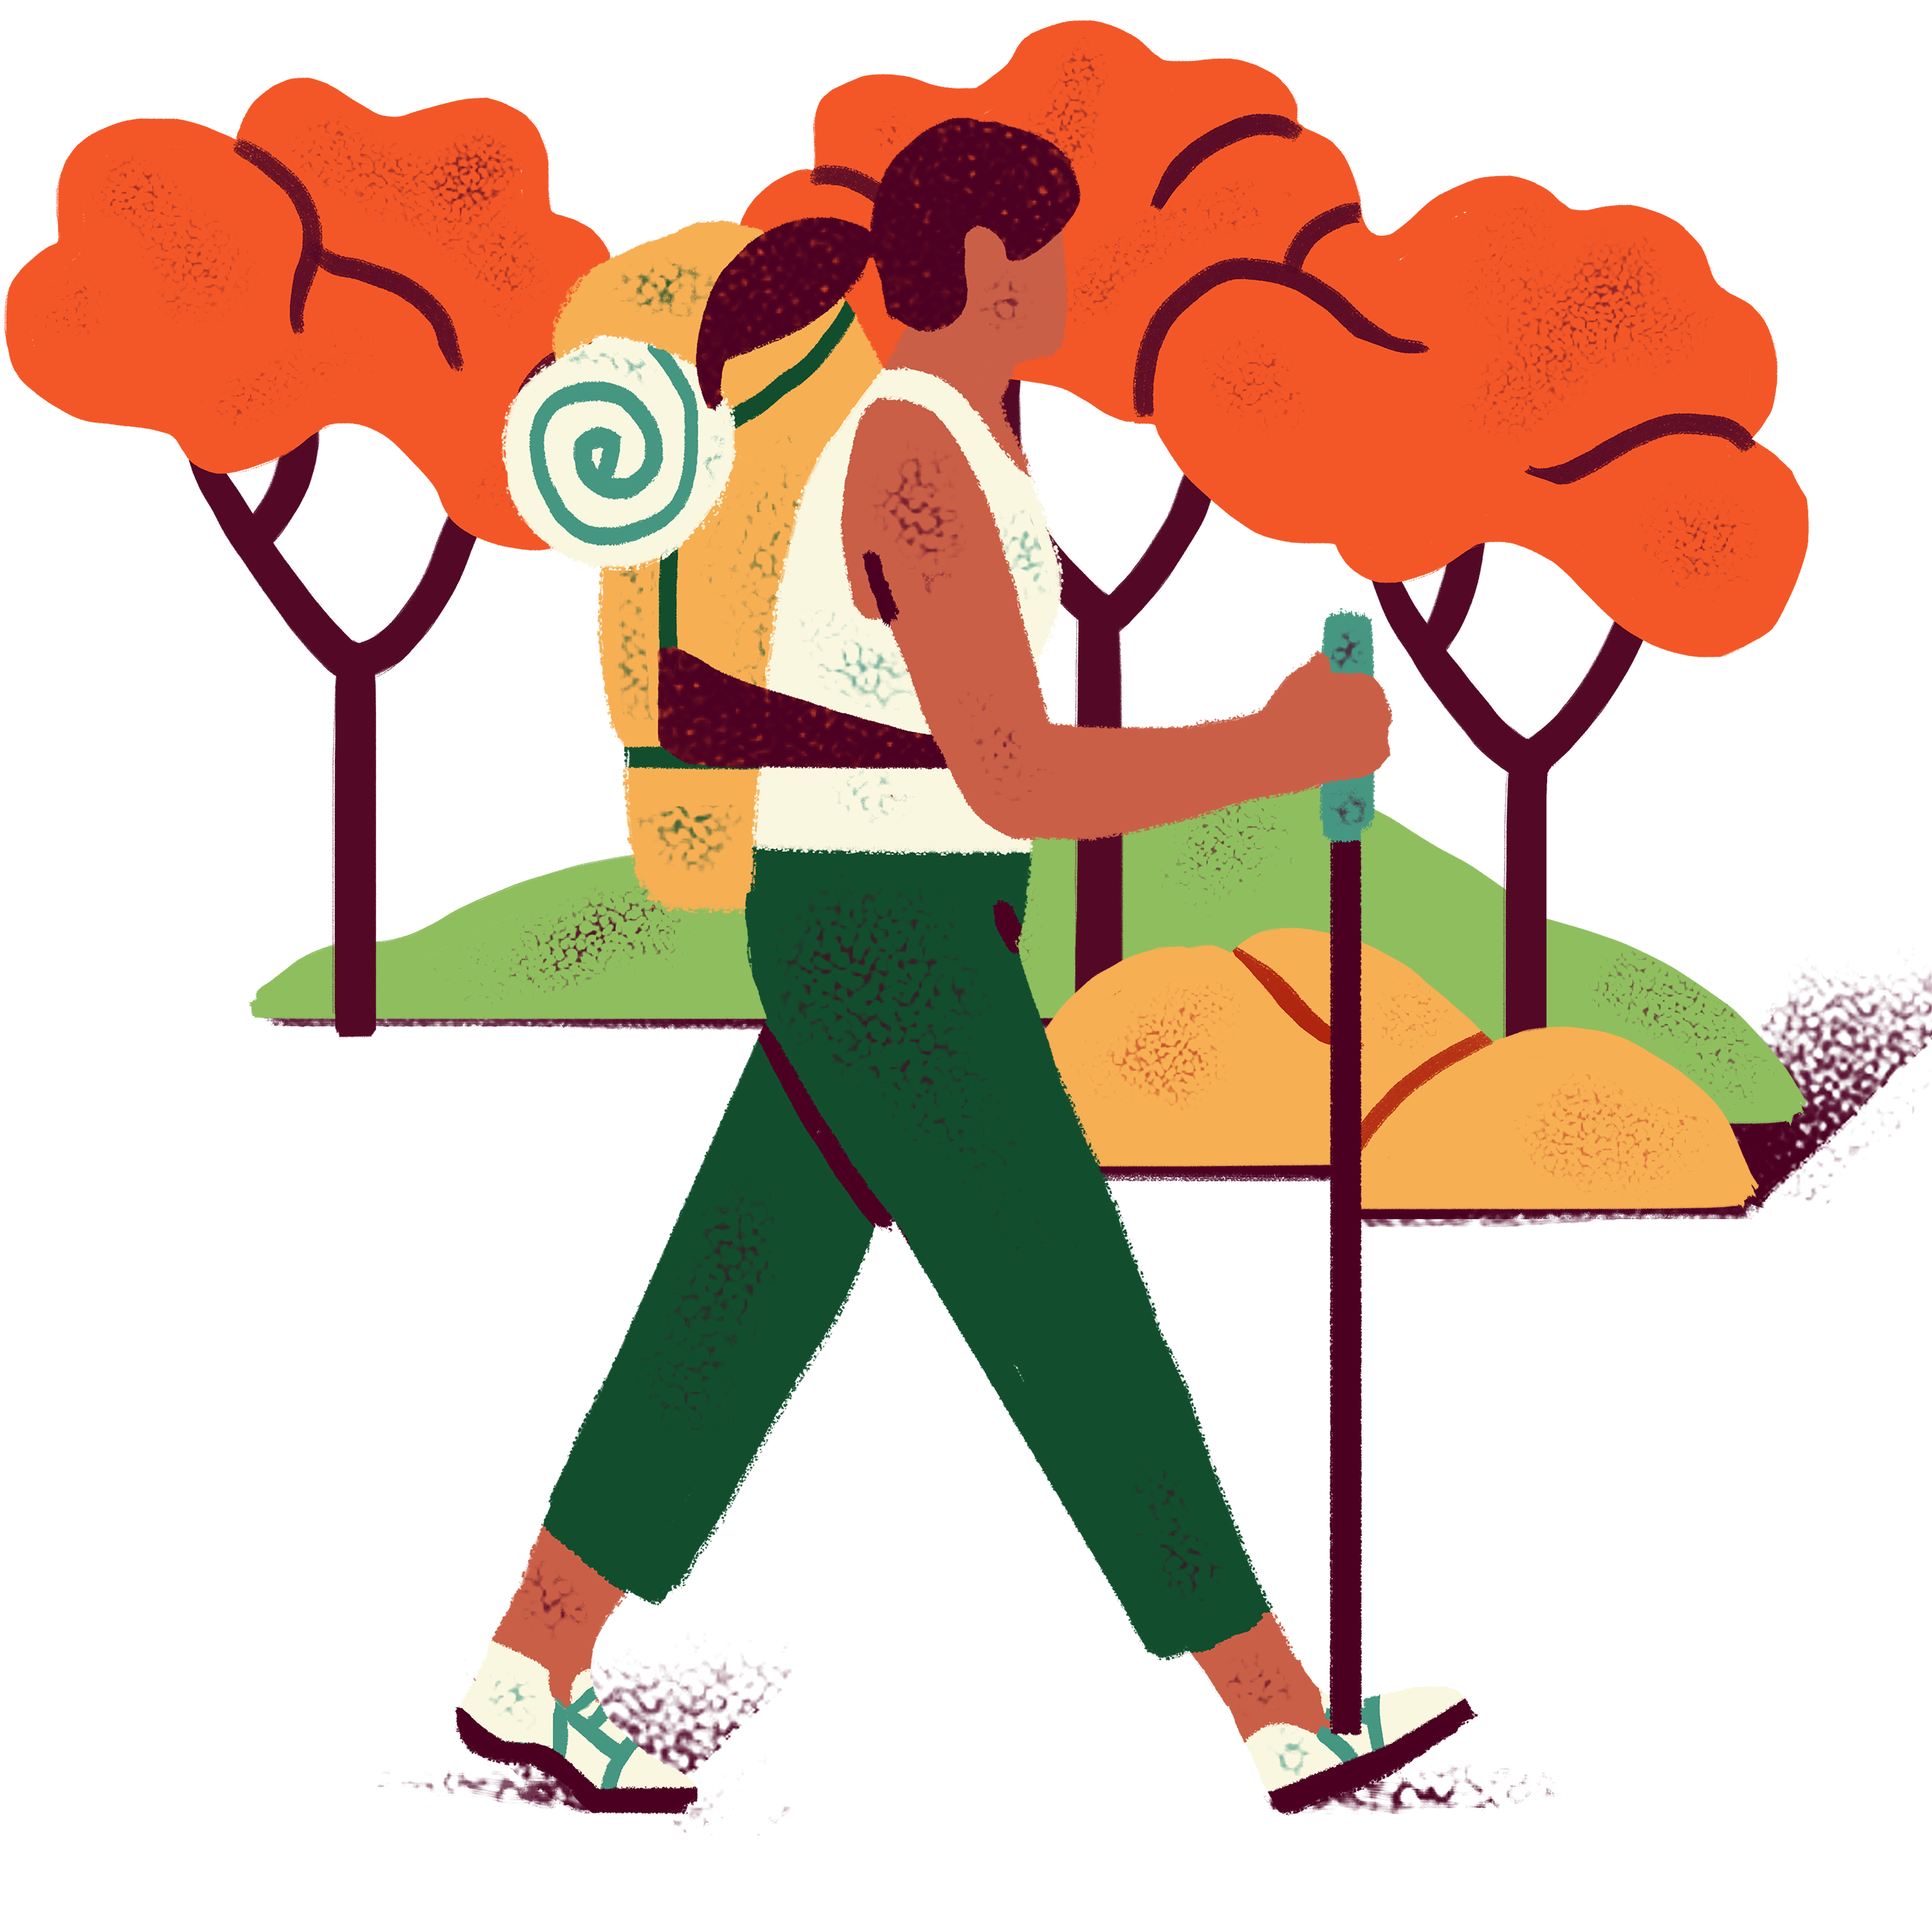 Illustrated image of fall trees with a hiker in front.